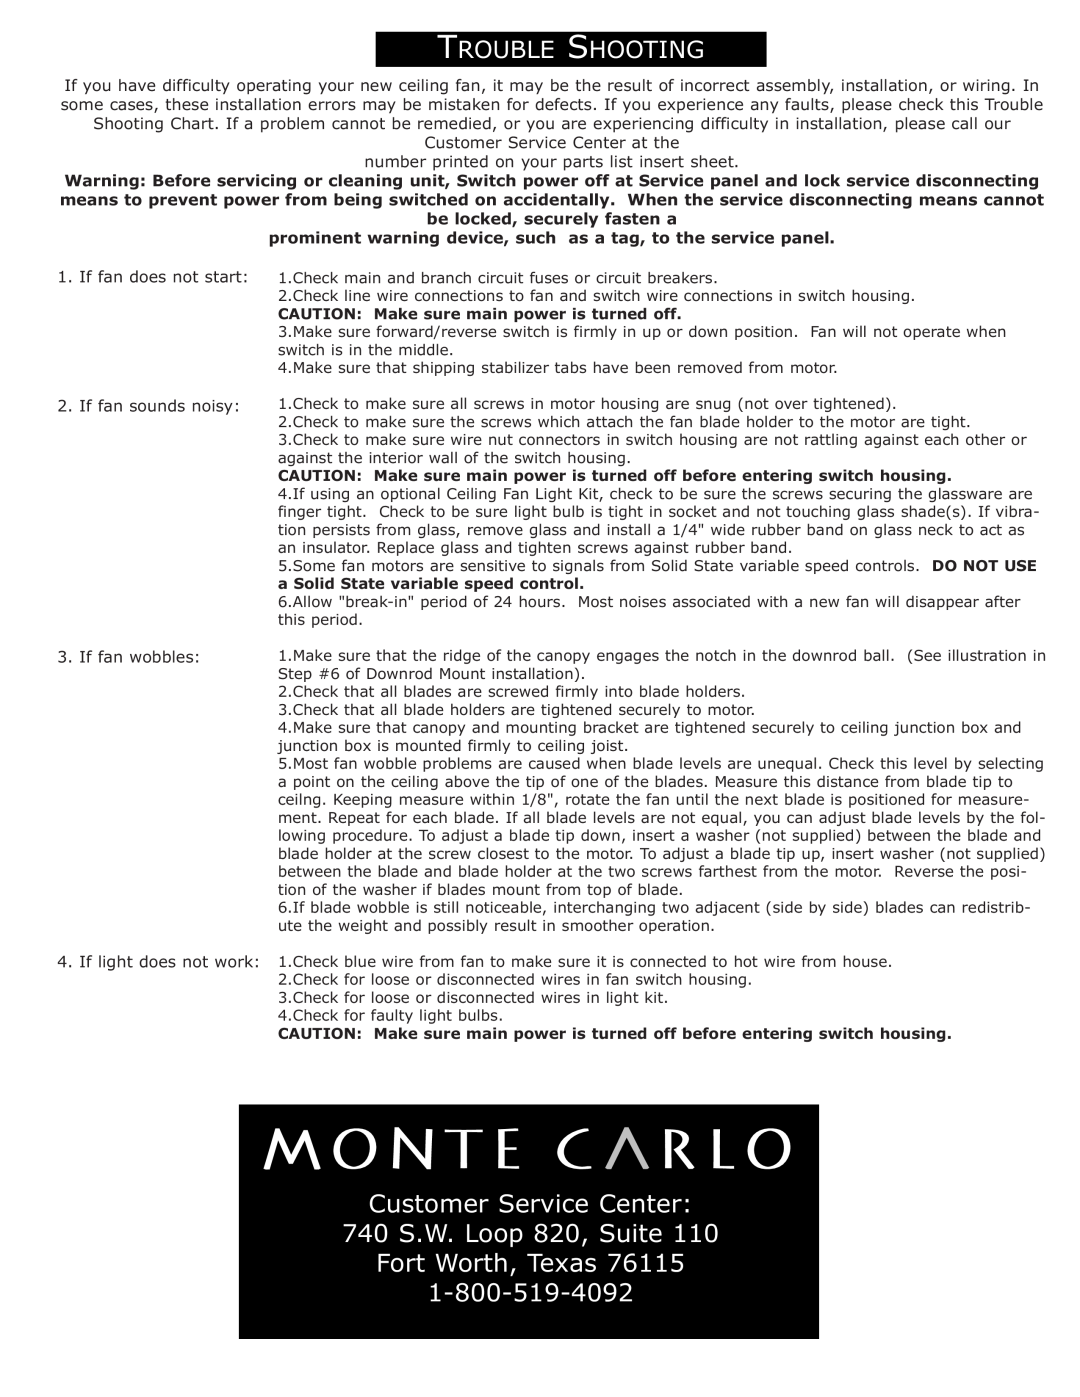 Monte Carlo Fan Company 5RH52 installation instructions Customer Service Center 740 S.W. Loop 820, Suite, Rouble Hooting 